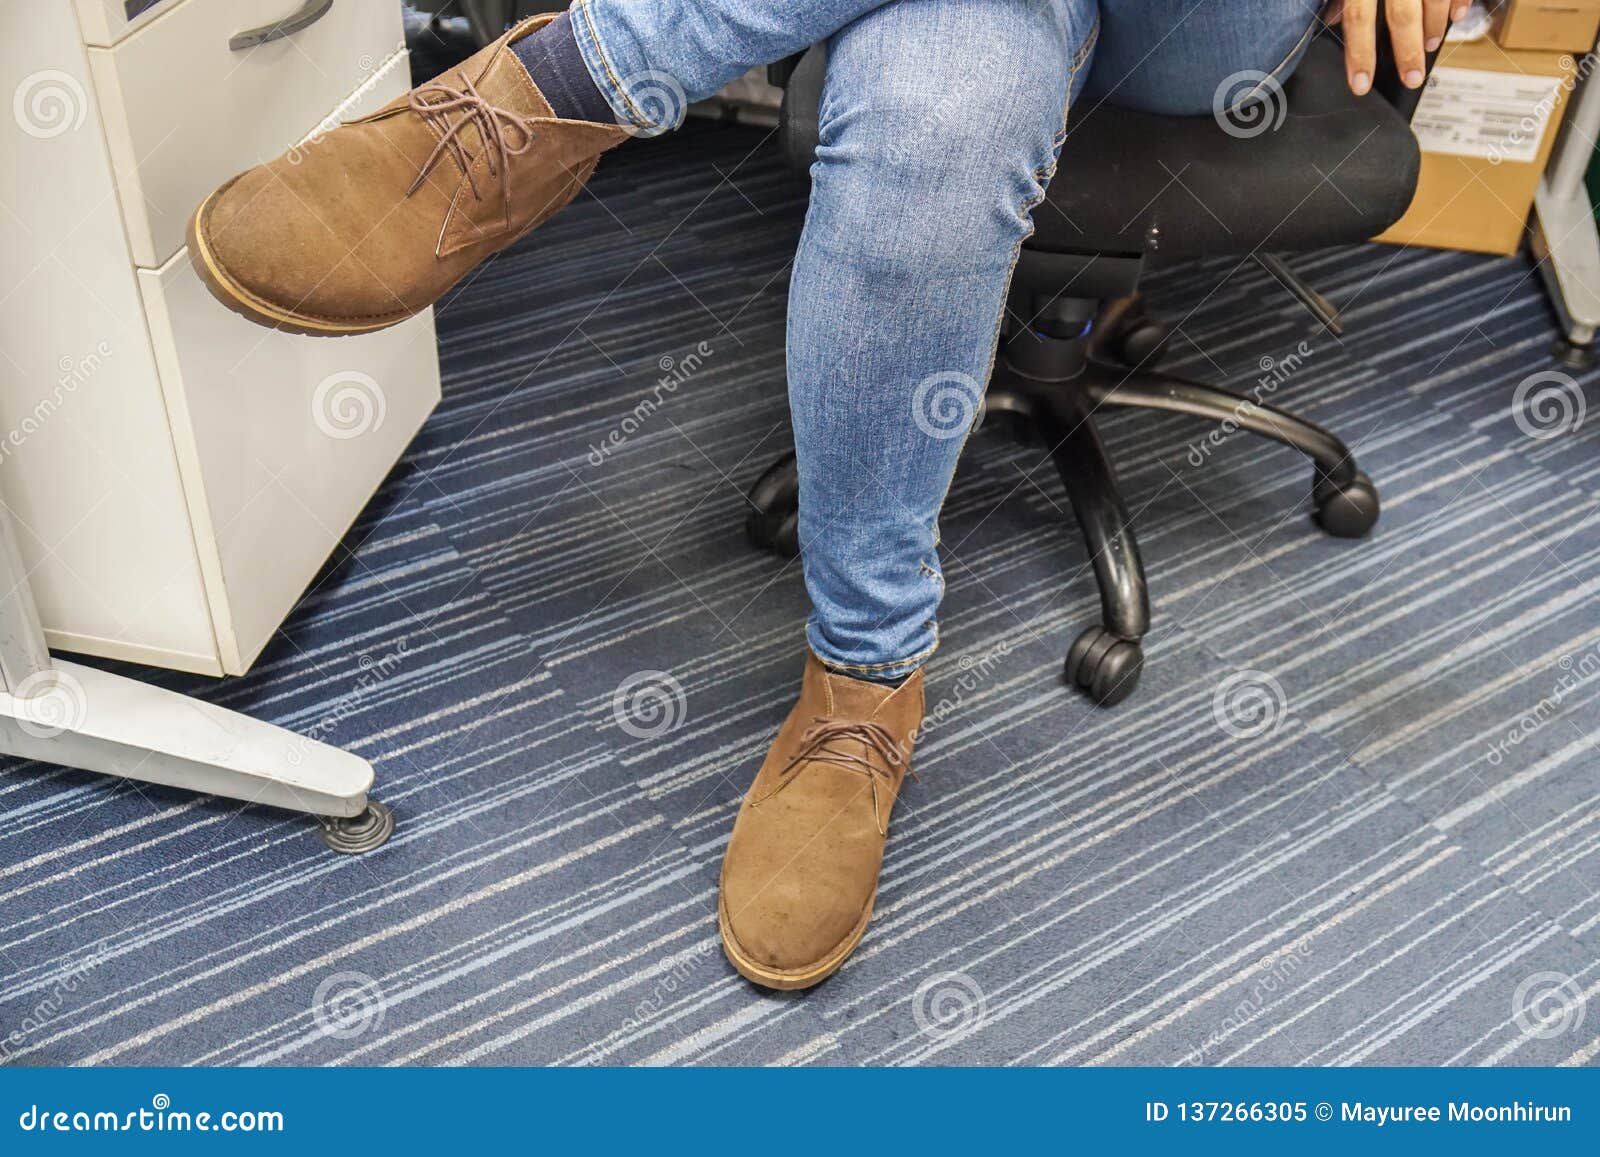 Close Up Man Wear Blue Jeans and Brown Leather Shoes Sit and Cross His Legs  on Office Chair Stock Image - Image of brown, cross: 137266305